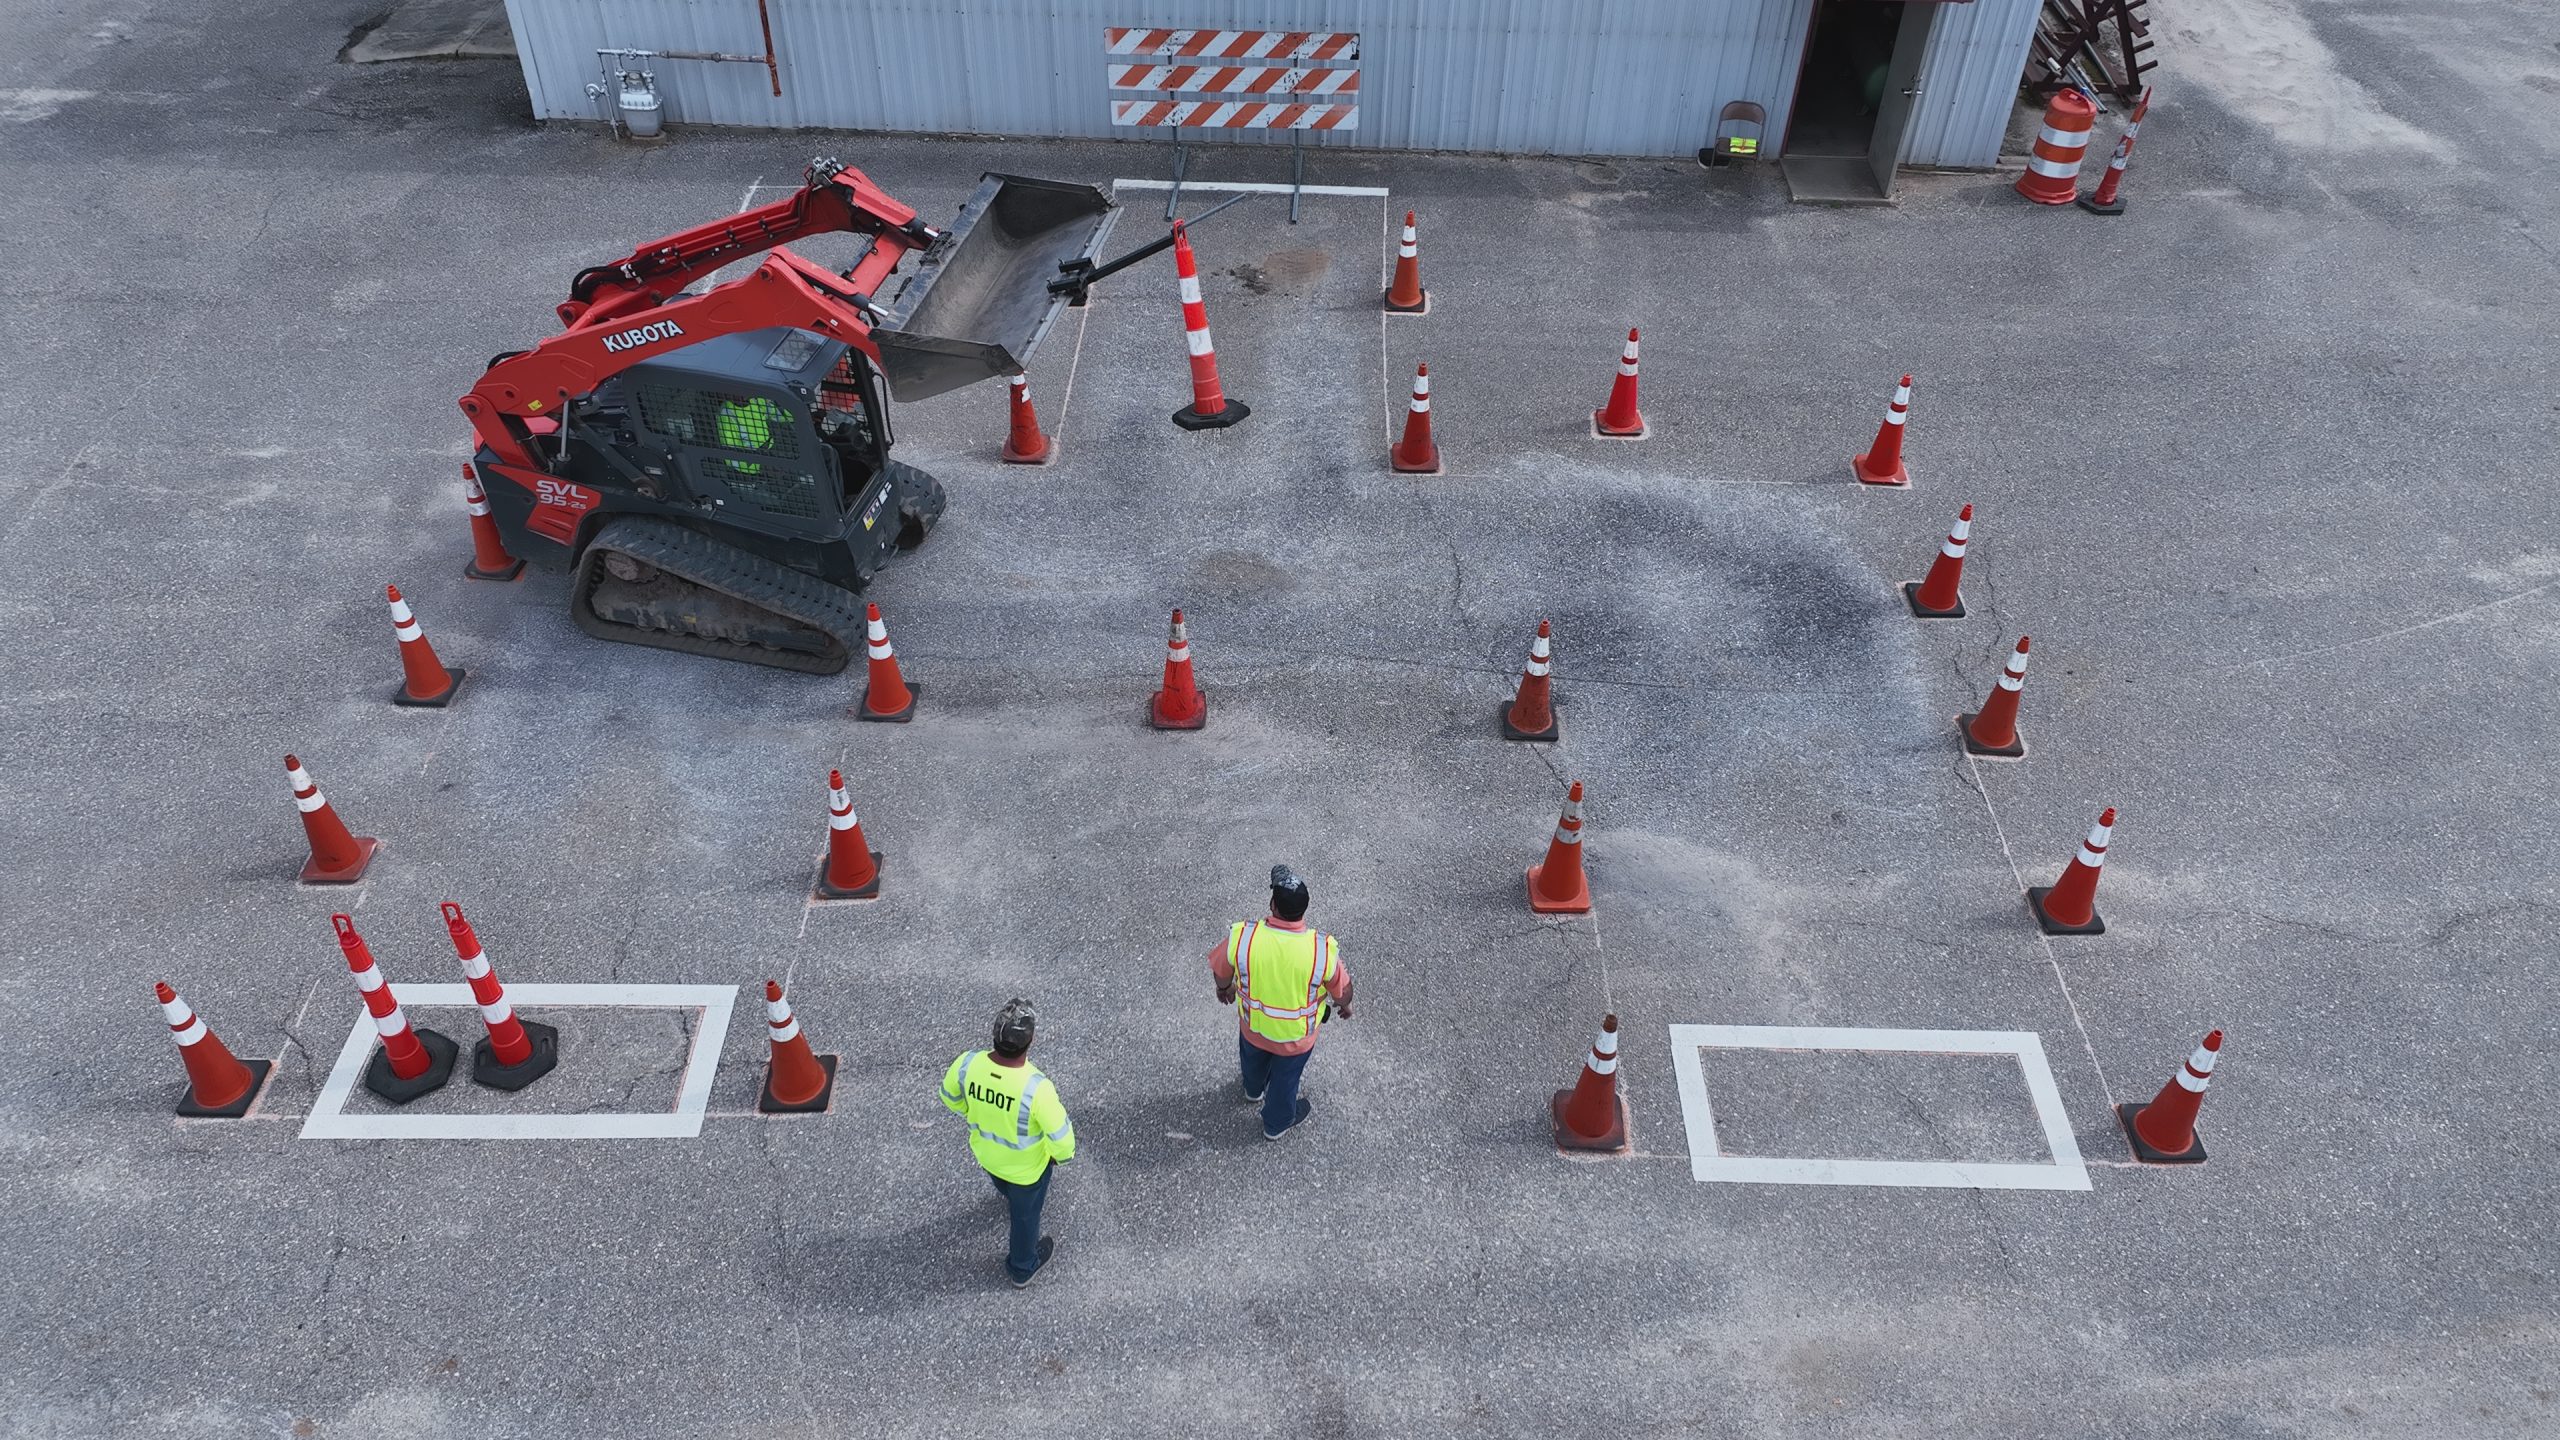 Drone view from above of the Roadeo Competition.